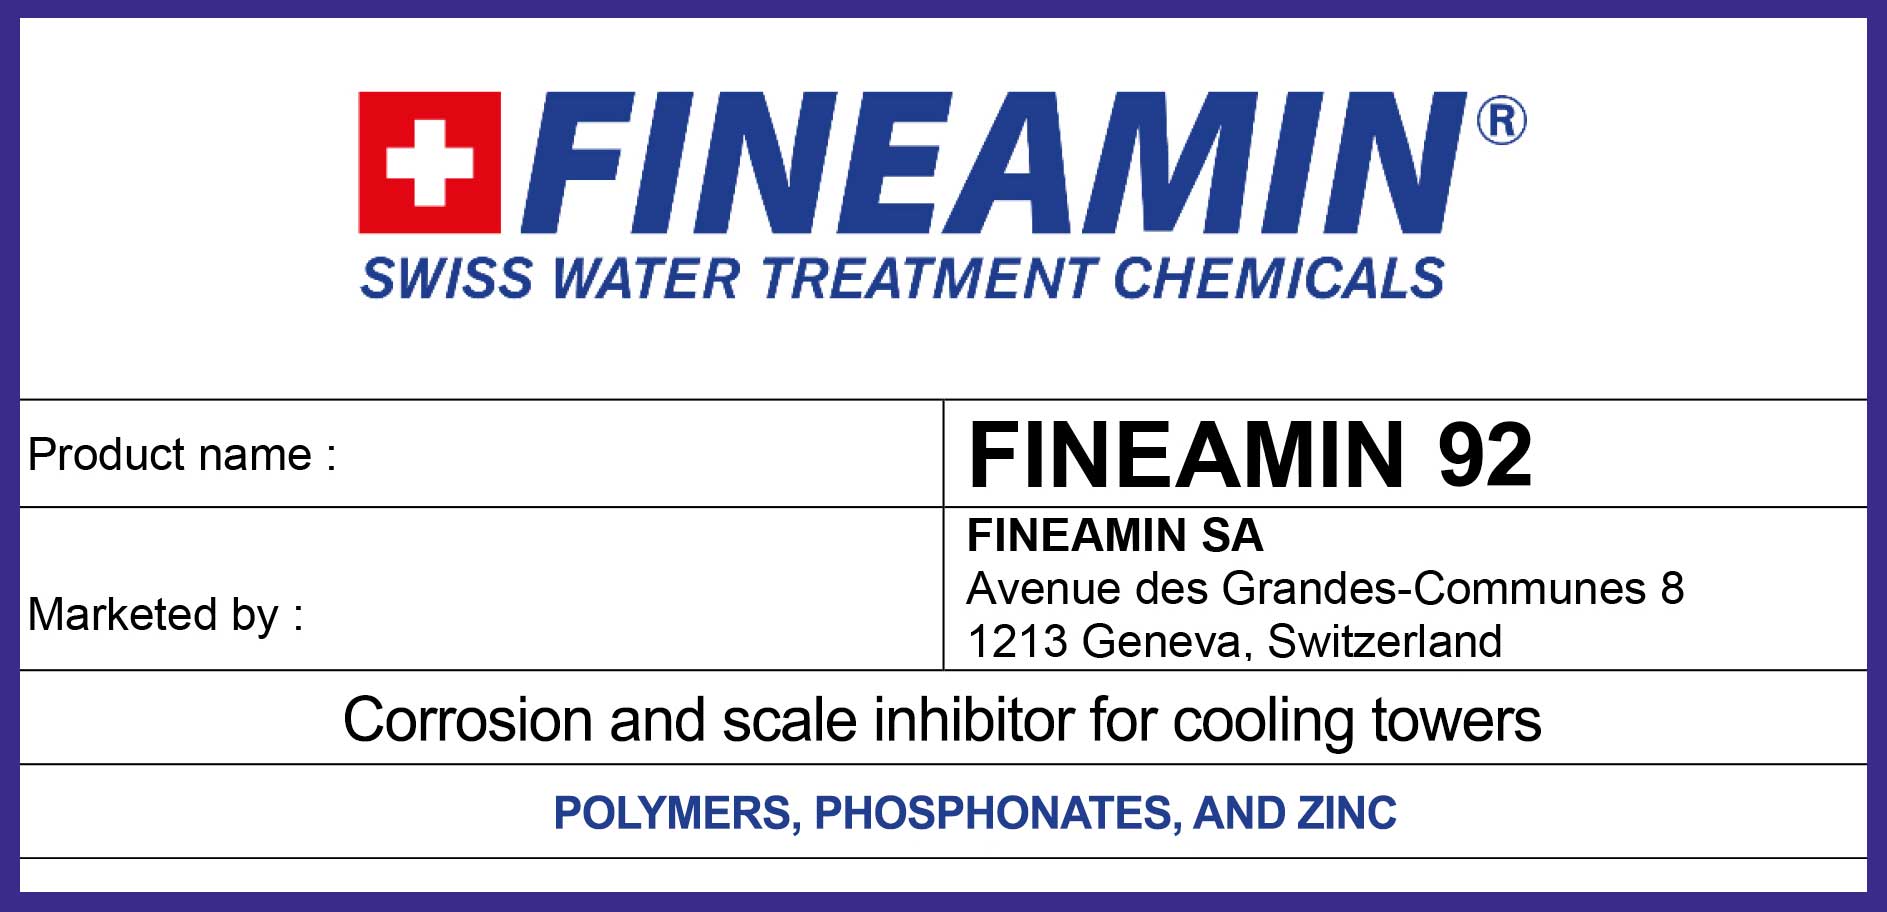 Fineamin 92 - Corrosion and scale inhibitor for cooling towers label